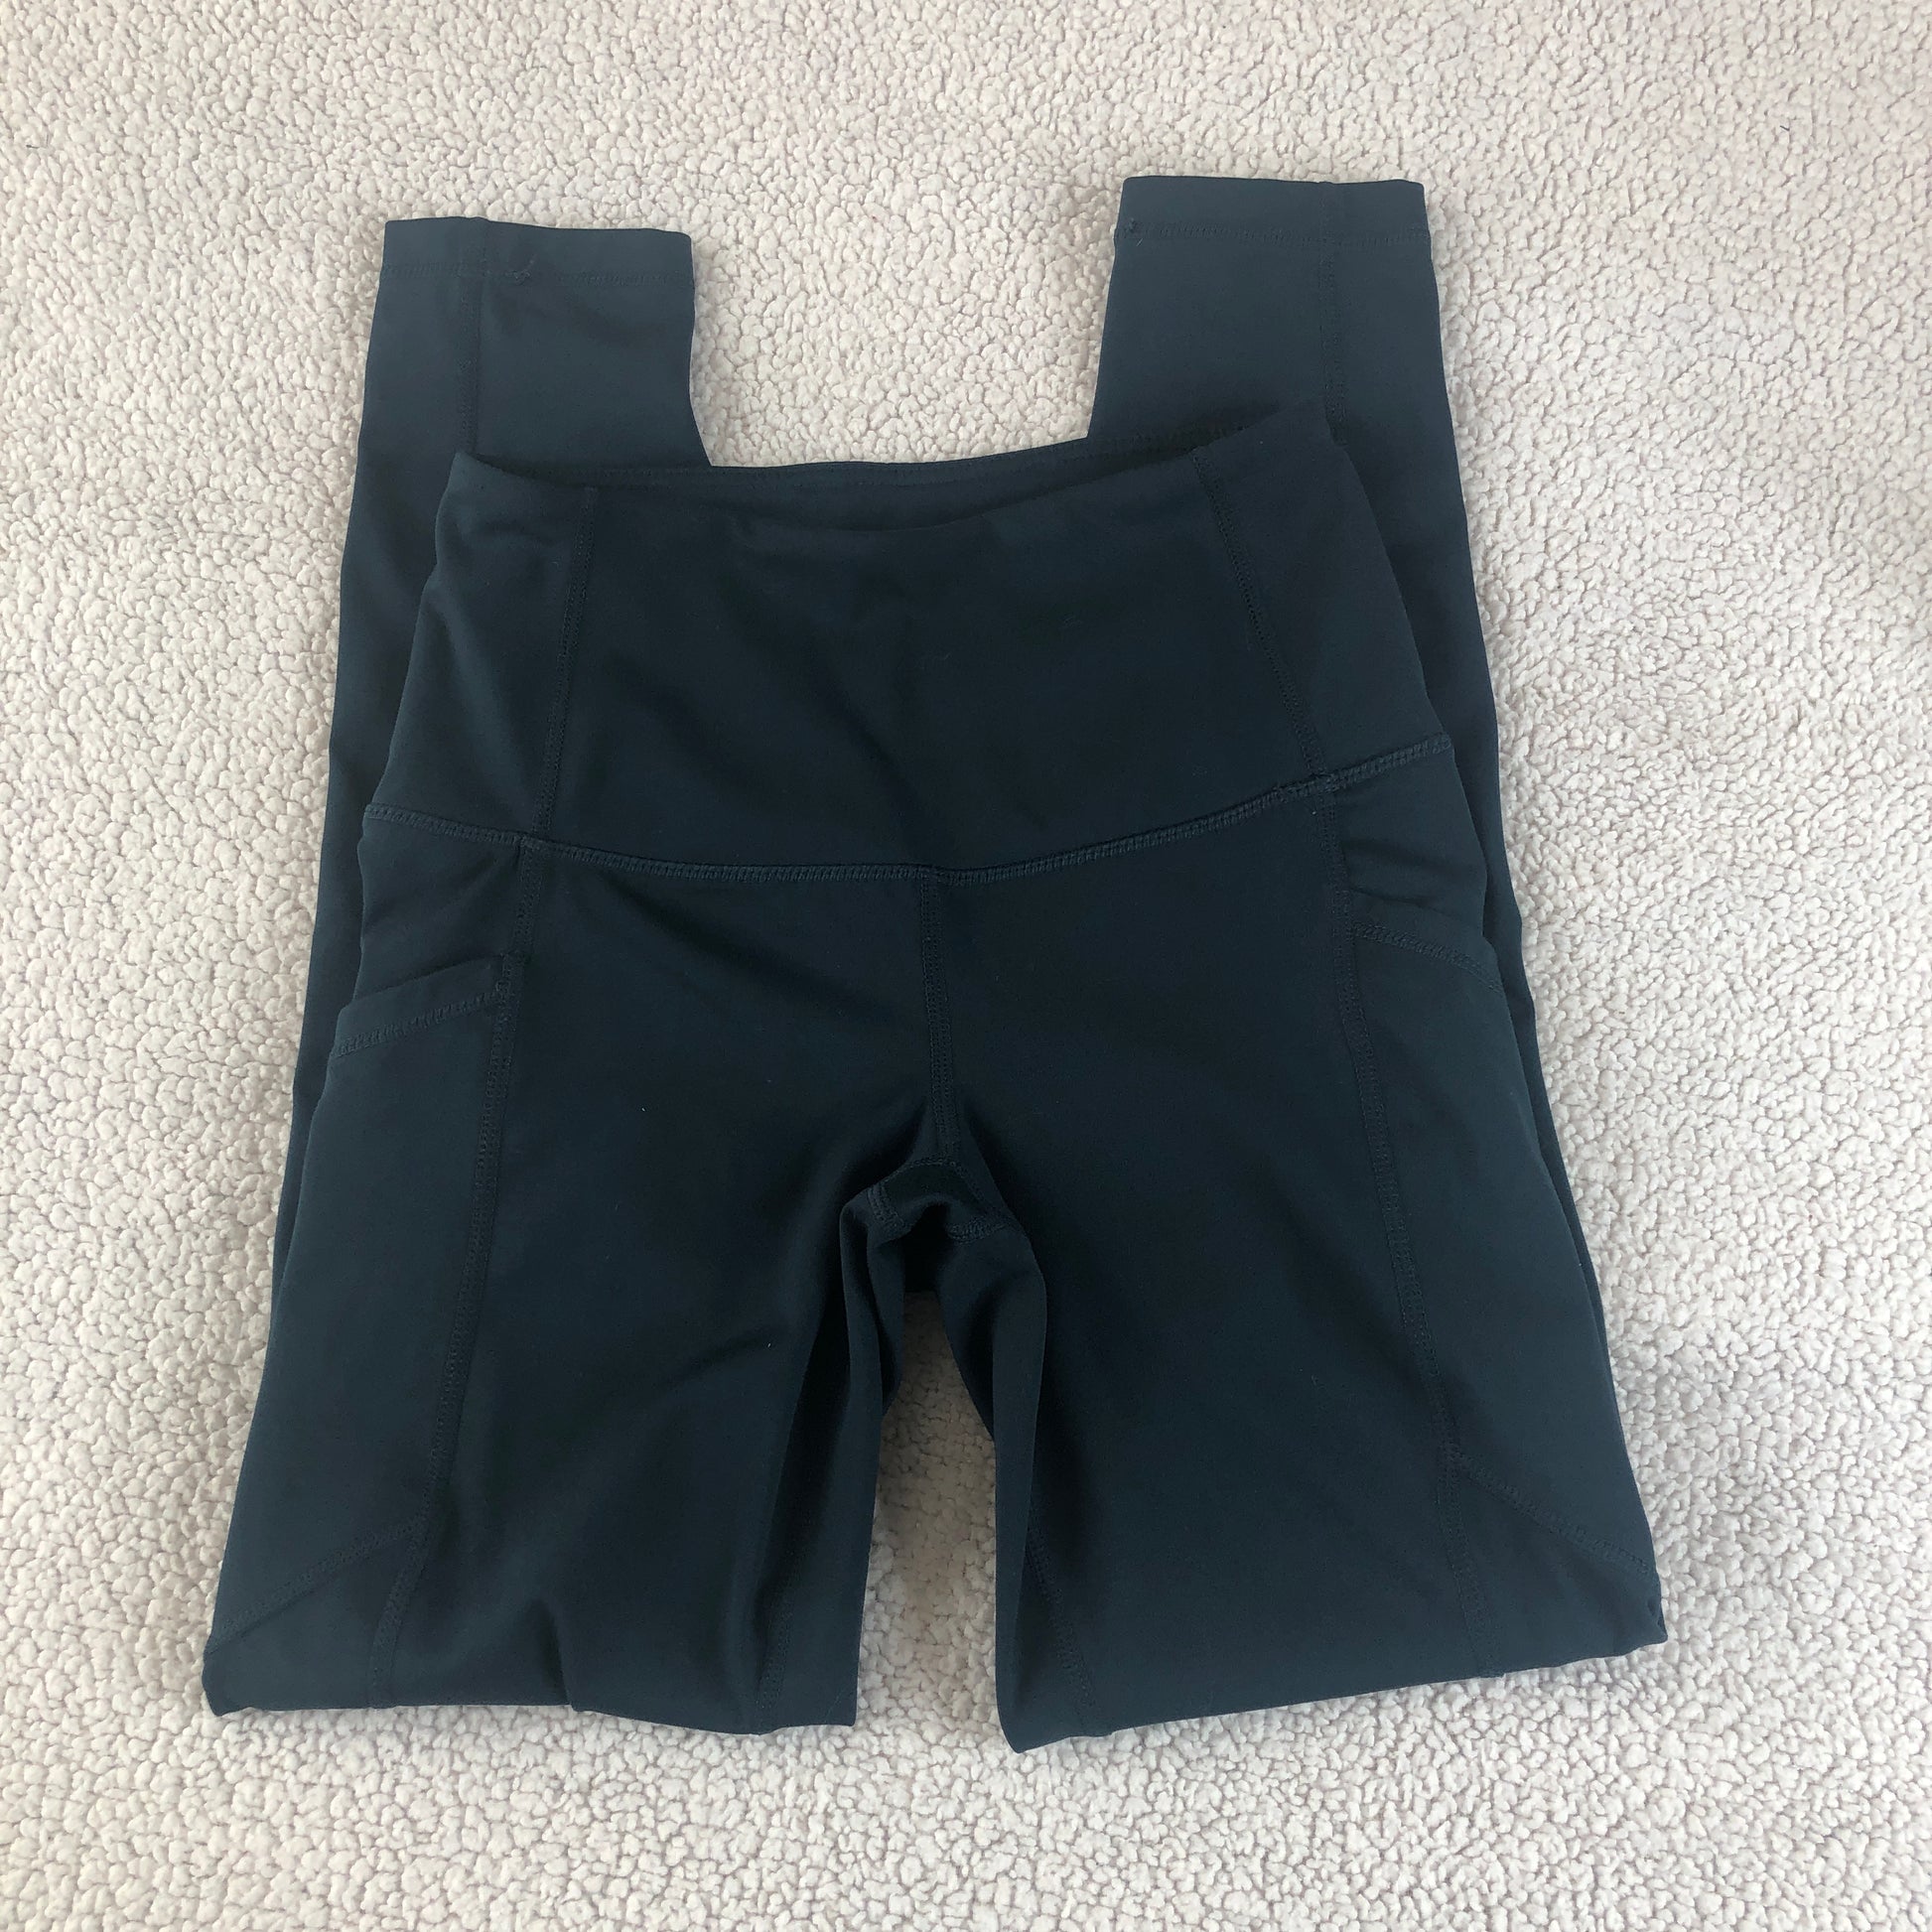 Yogalicious Lux teal green high waisted leggings ankle length